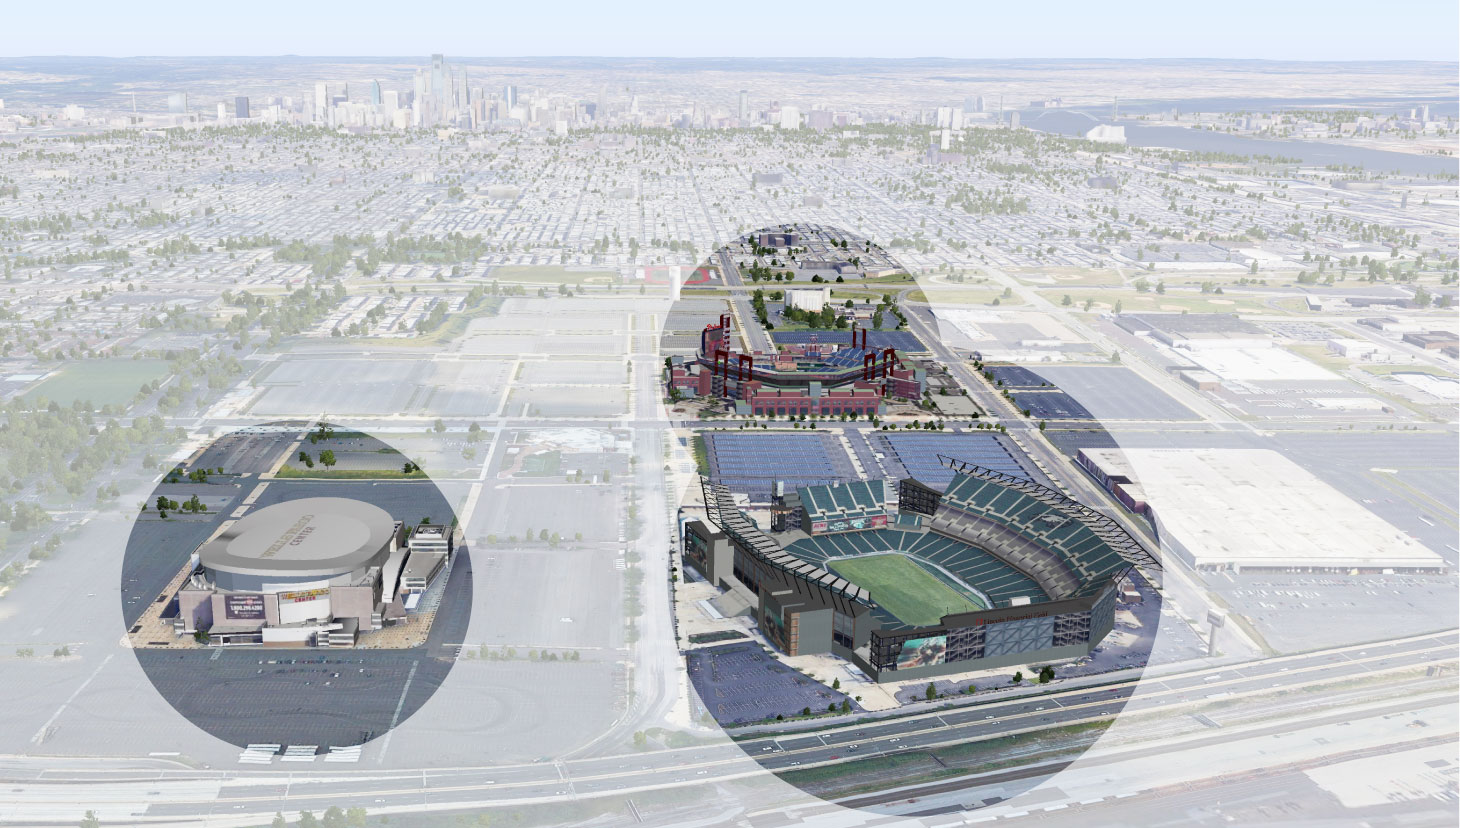 Aerial view of Bears and Eagles Riverfront Stadium located in